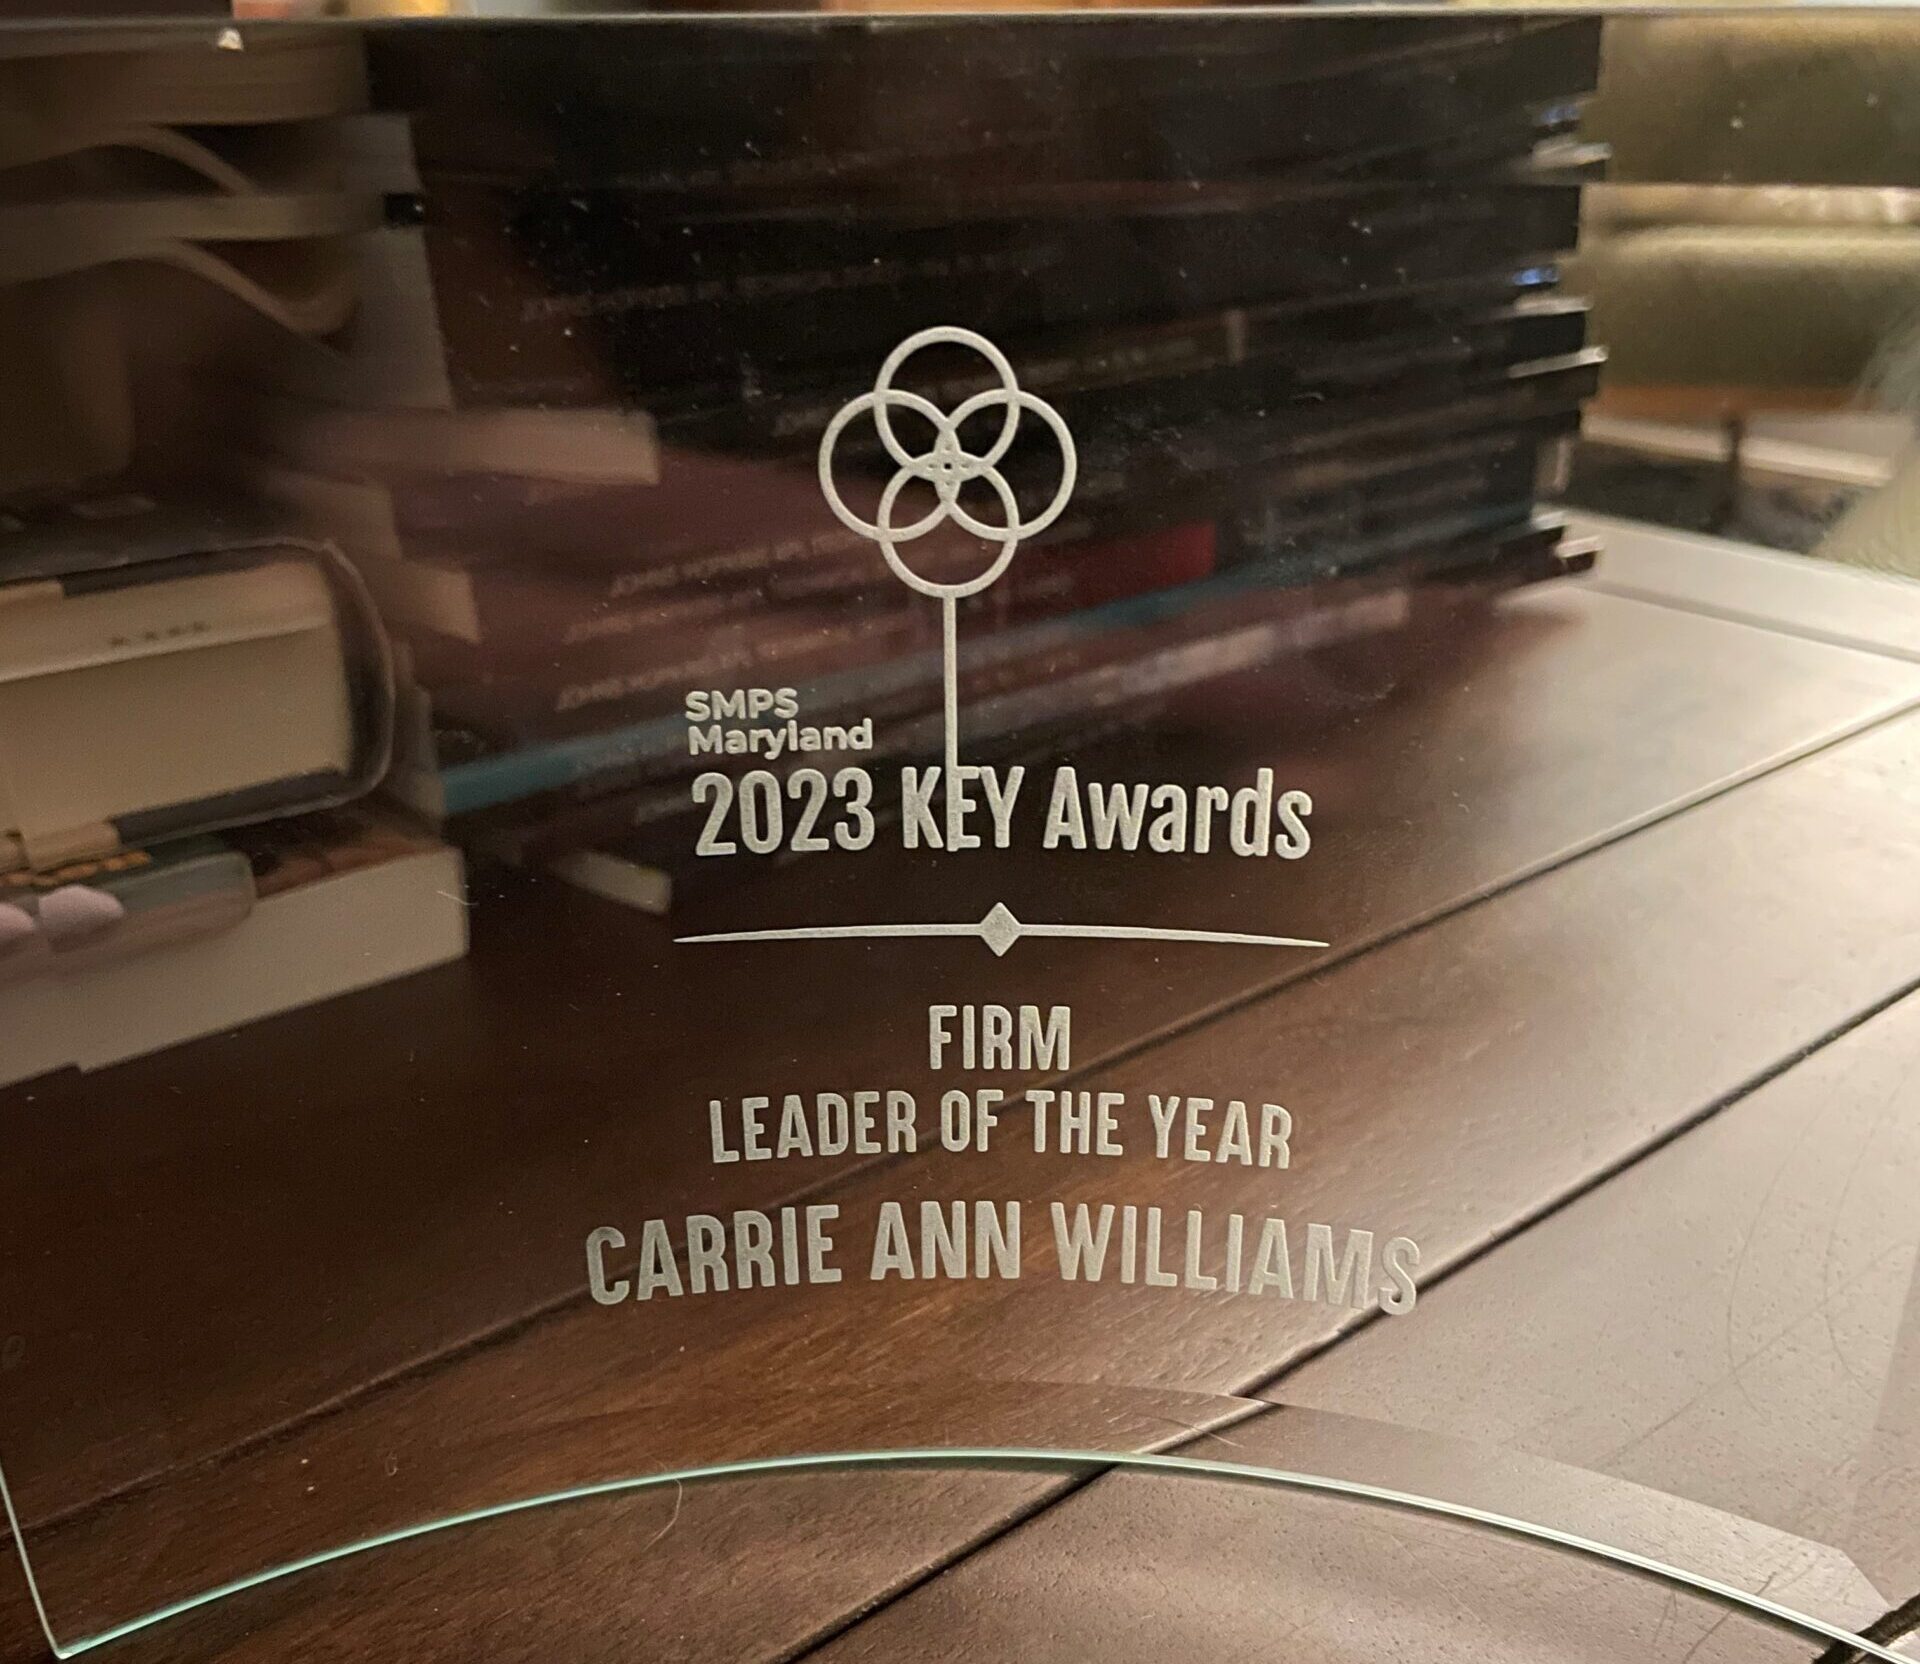 Carrie Ann Williams receives Firm Leader of the Year Award from SMPS Maryland